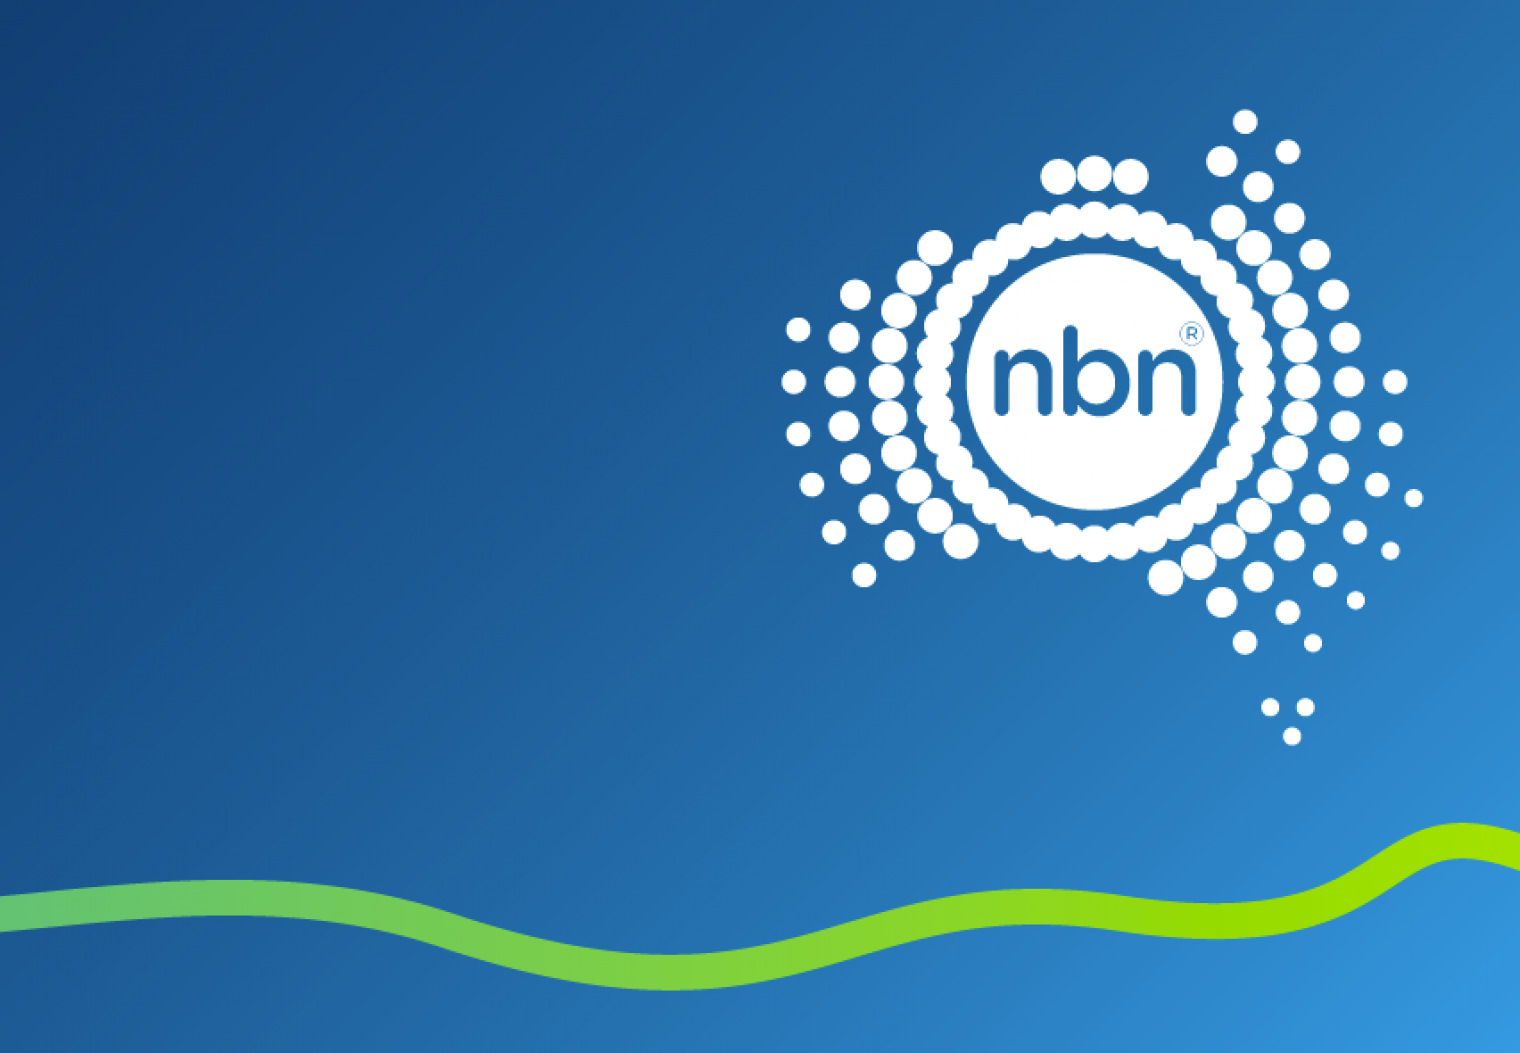 Changes to the NBN’s pricing model